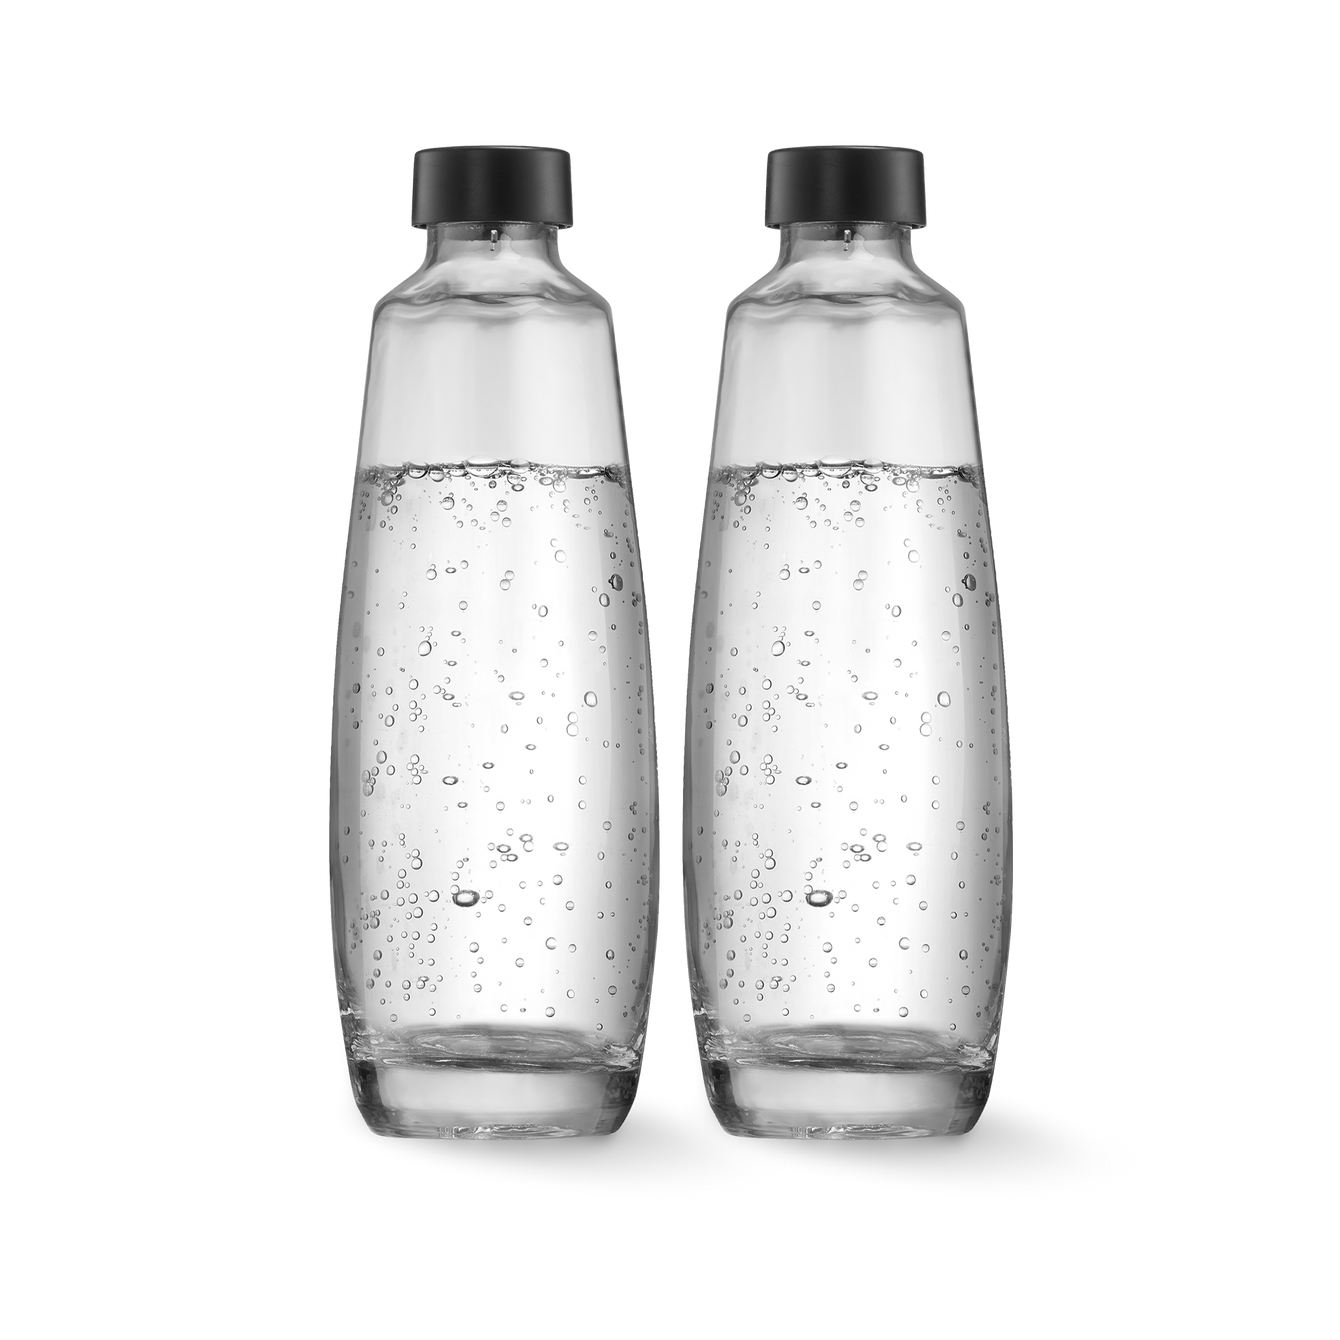 DUO Glass Carafe, 2-pack